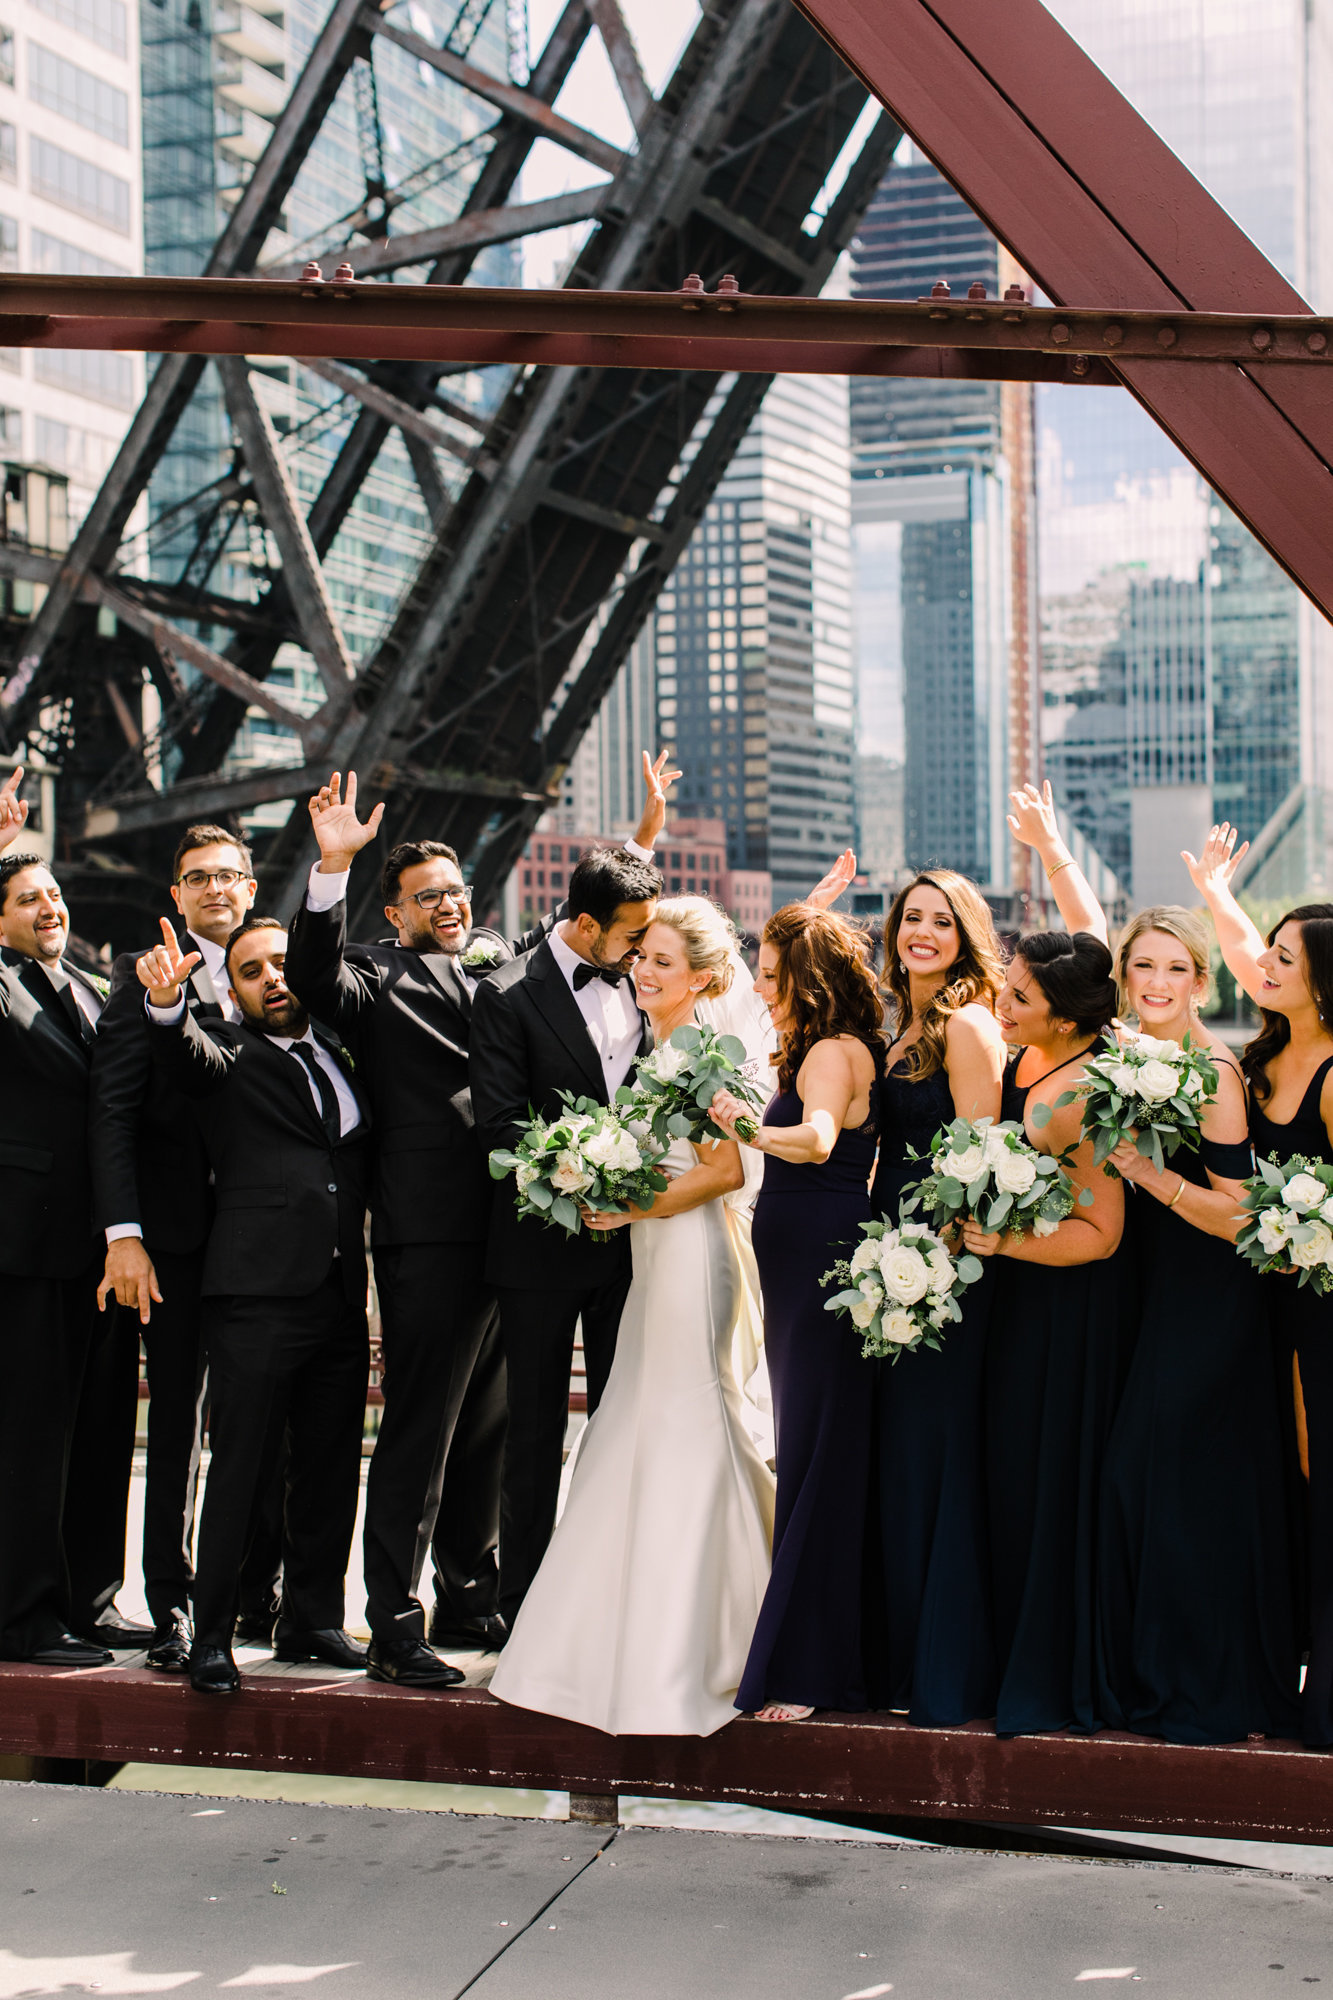 Wedding party poses for a portrait standing on the Kinzie Street Bridge in Chicago, IL.